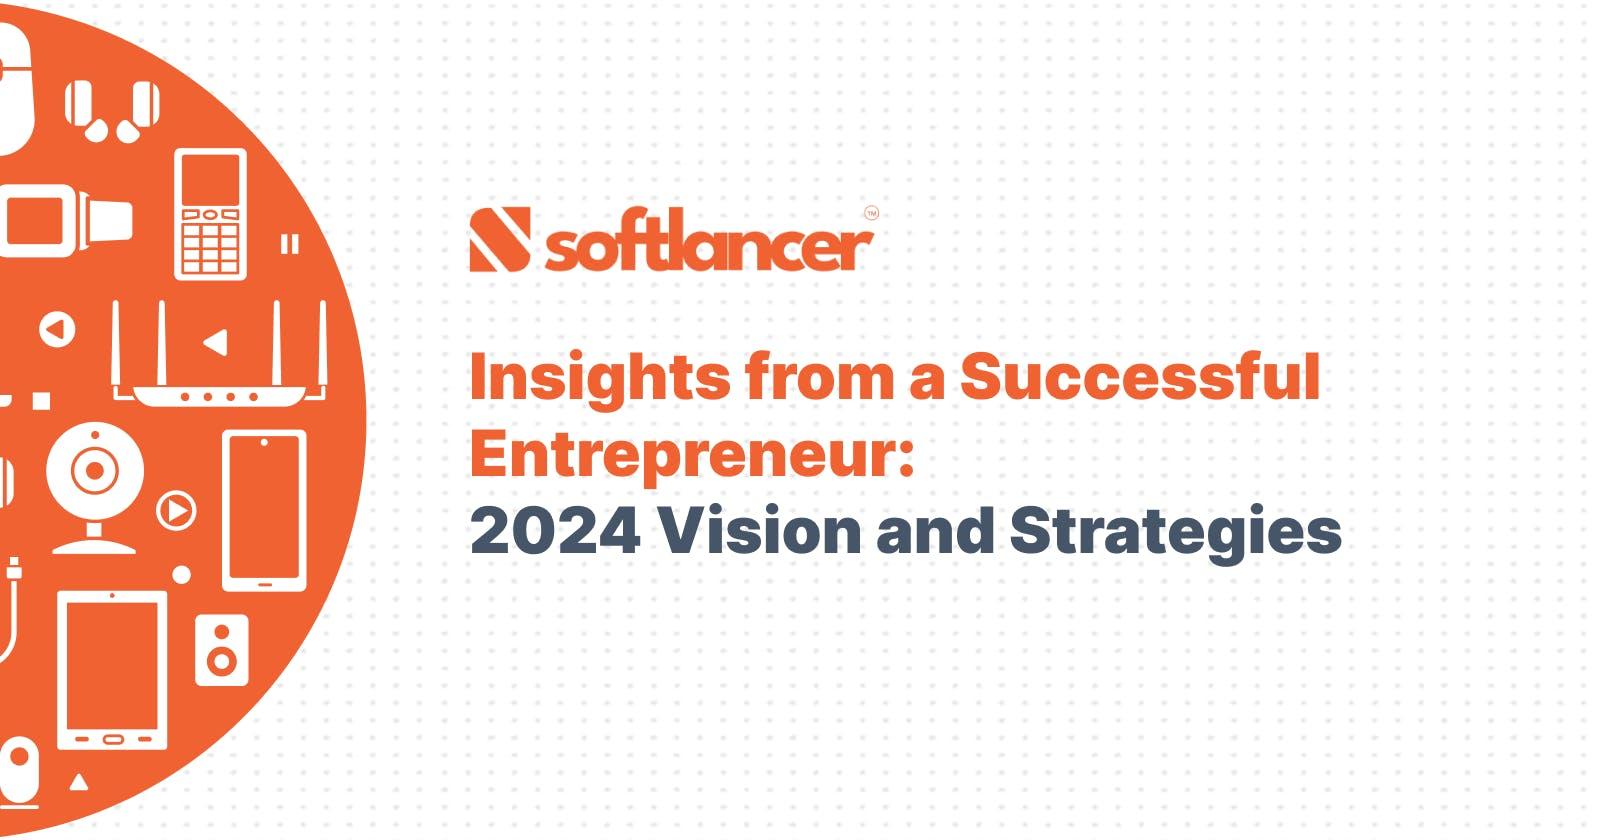 Insights from a Successful Entrepreneur: 2024 Vision and Strategies